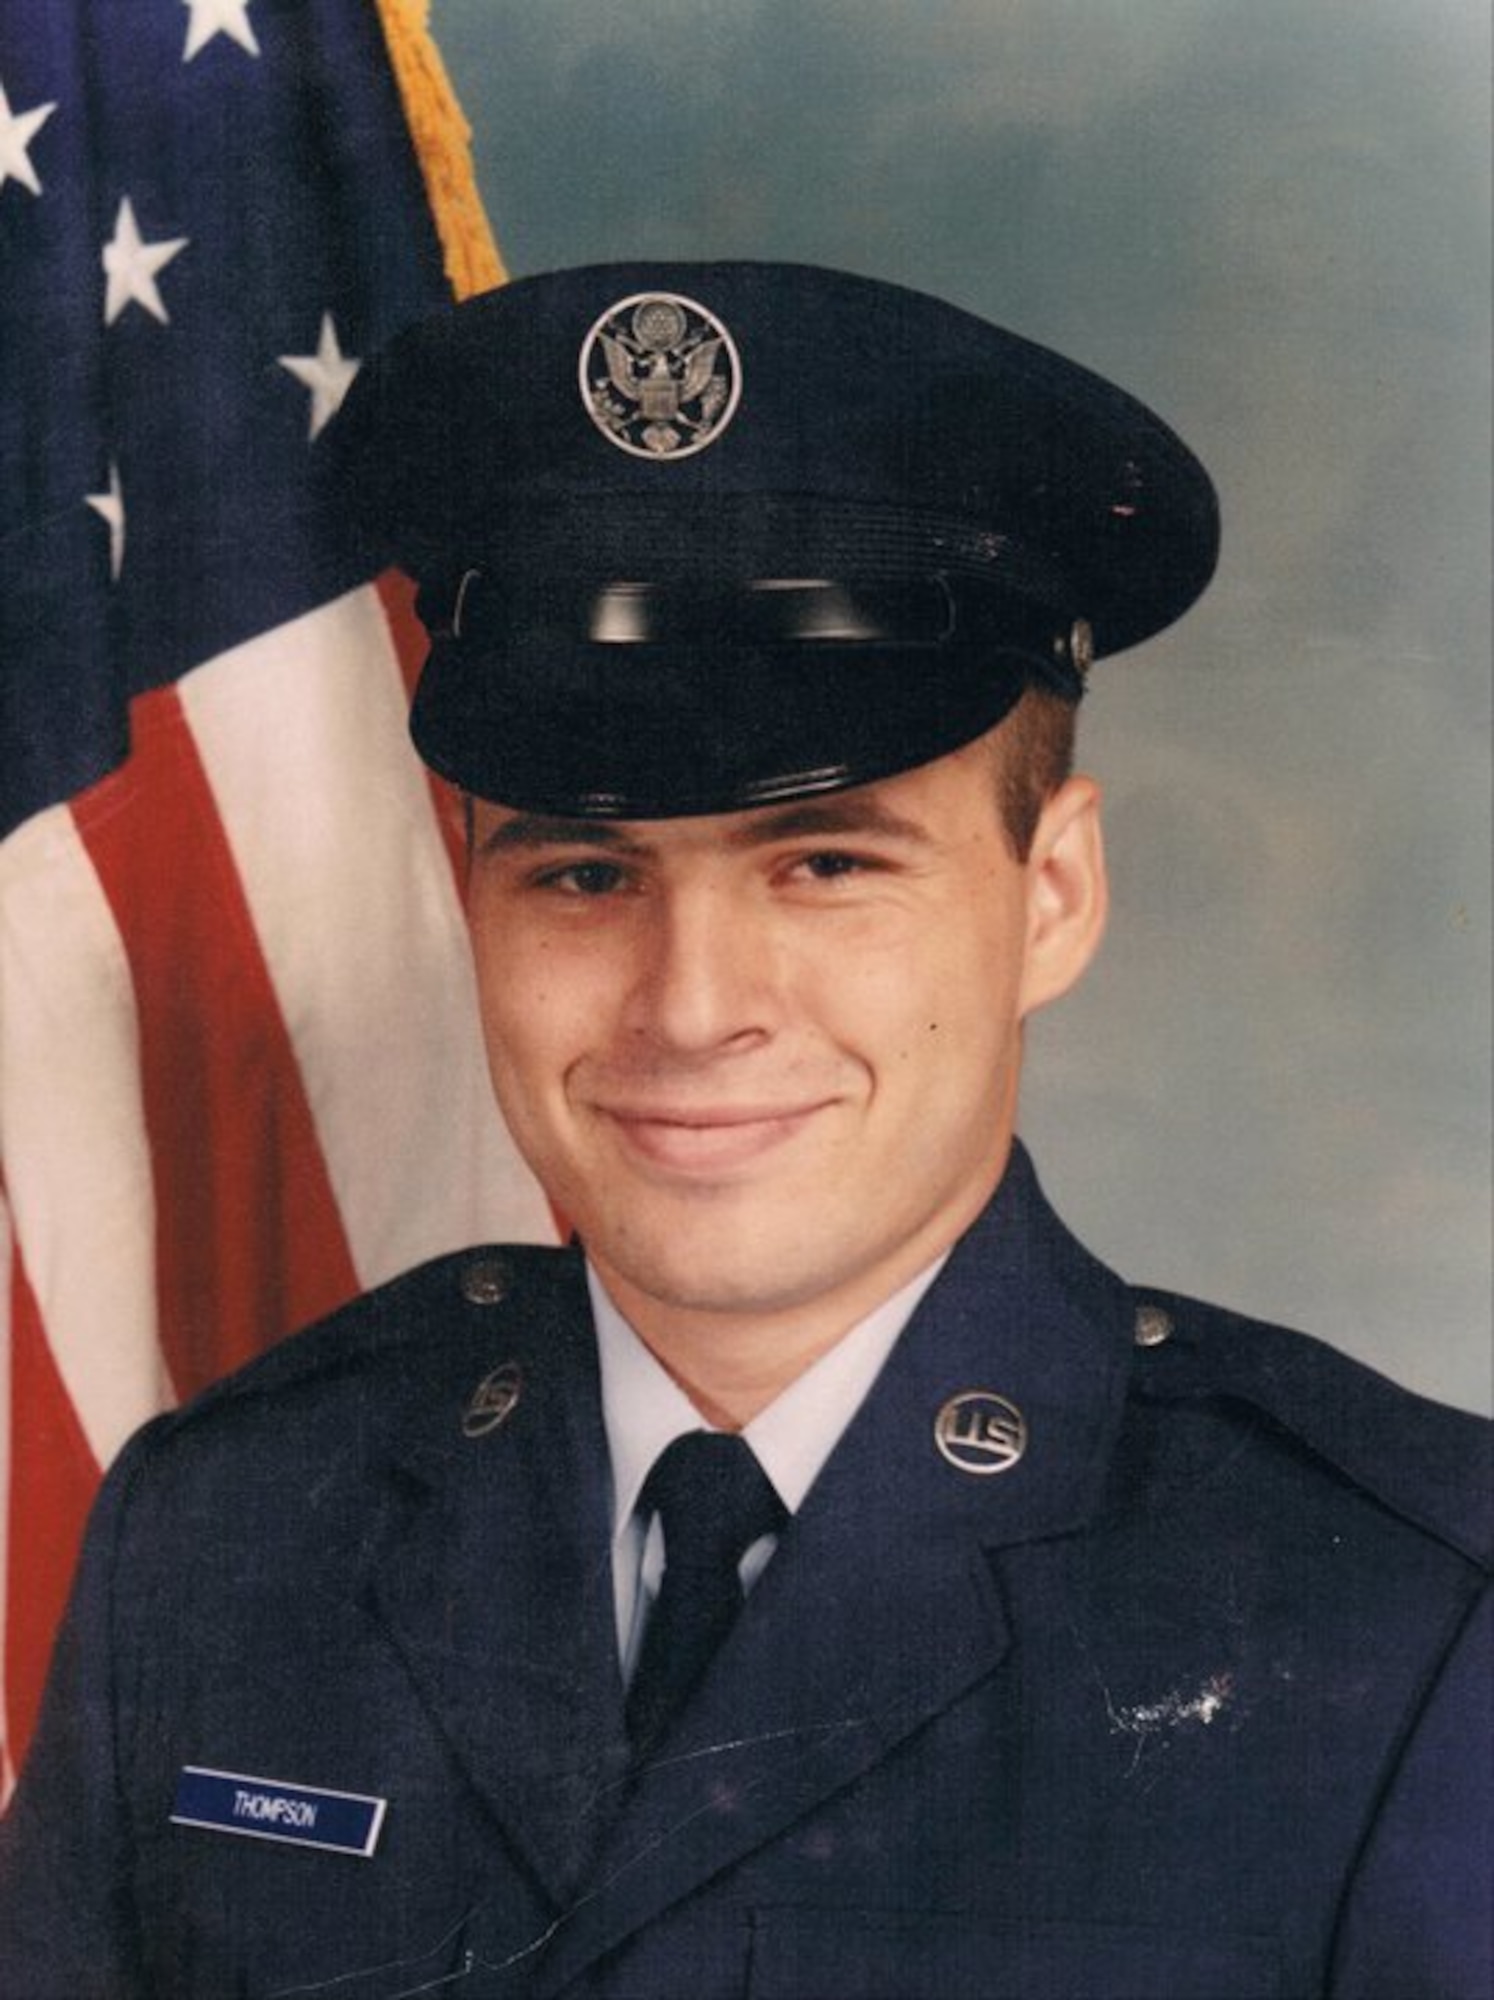 Then U.S. Air Force Airman John Thompson poses for his official photo at Lackland Air Force Base, Texas, July 1983.